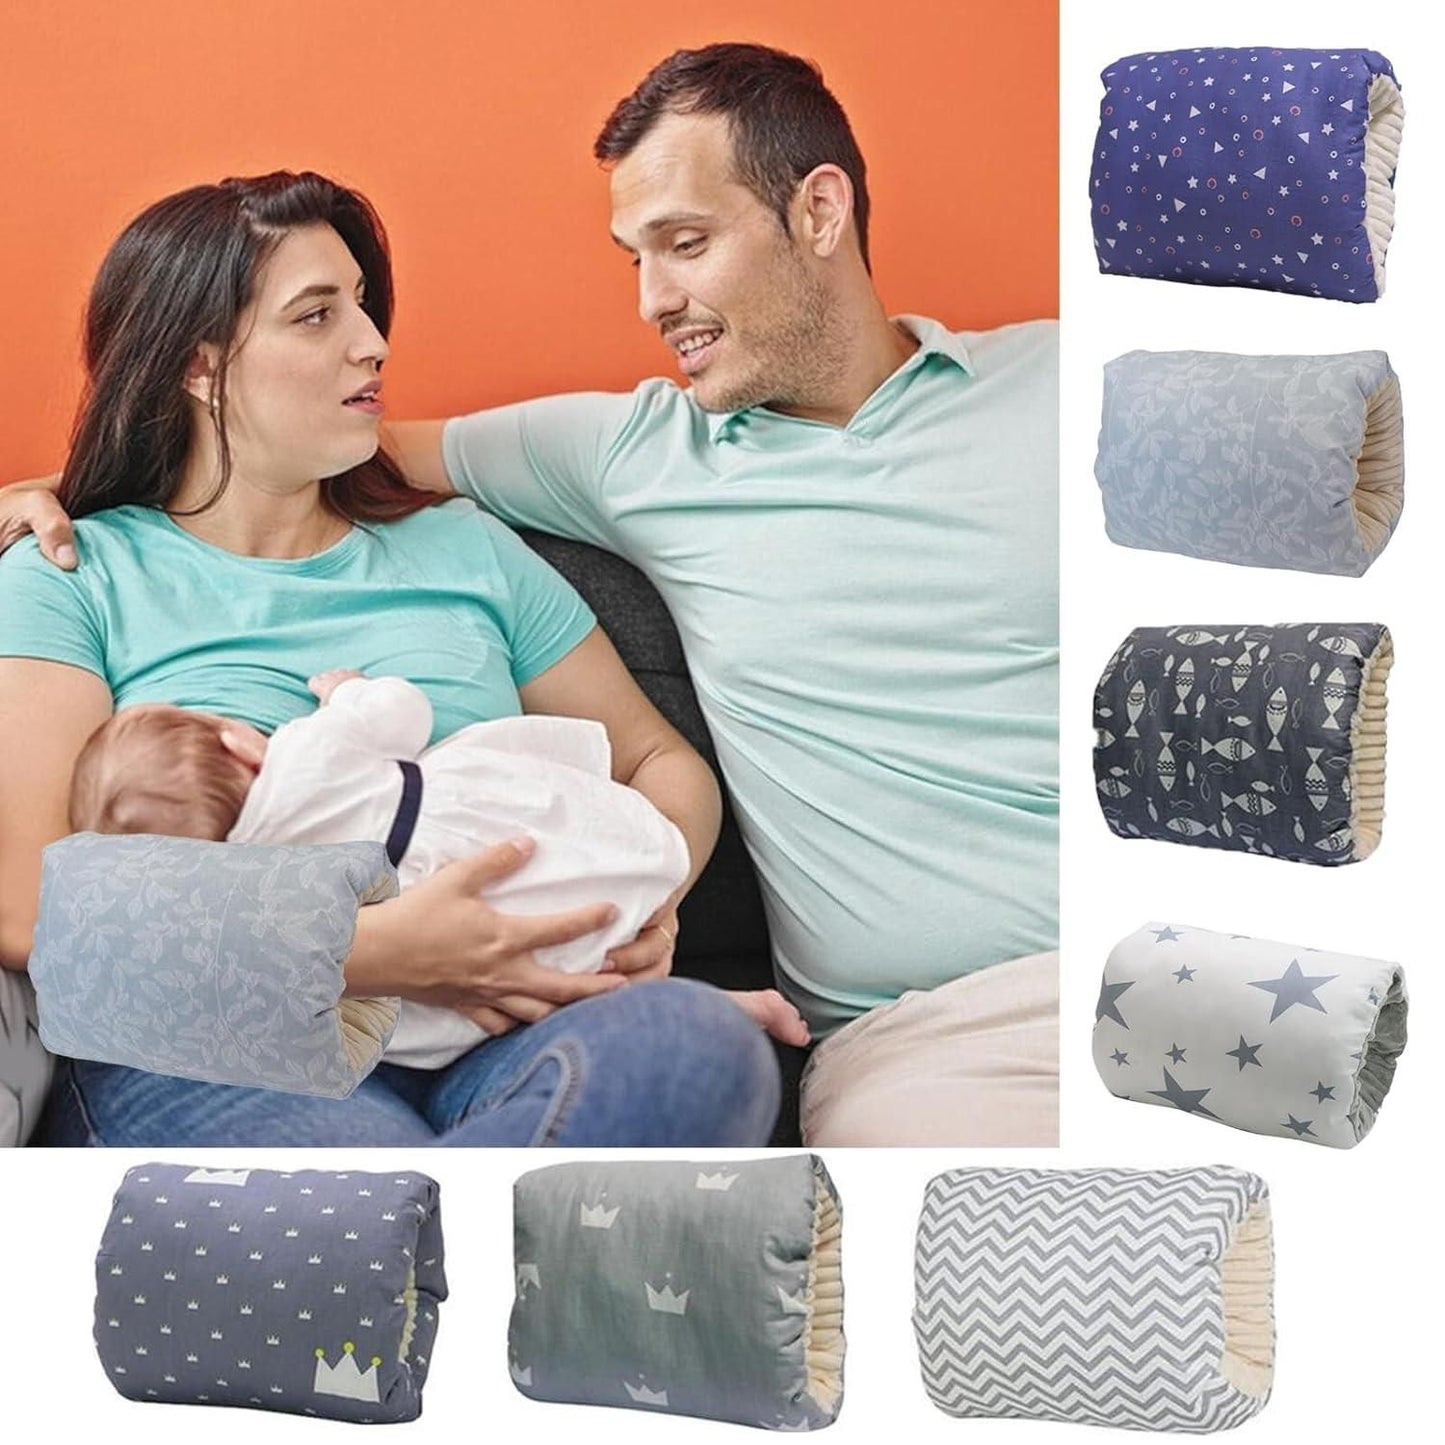 Cozie Cradle Baby Pillow: The Ultimate Comfort Companion for Your Little One!